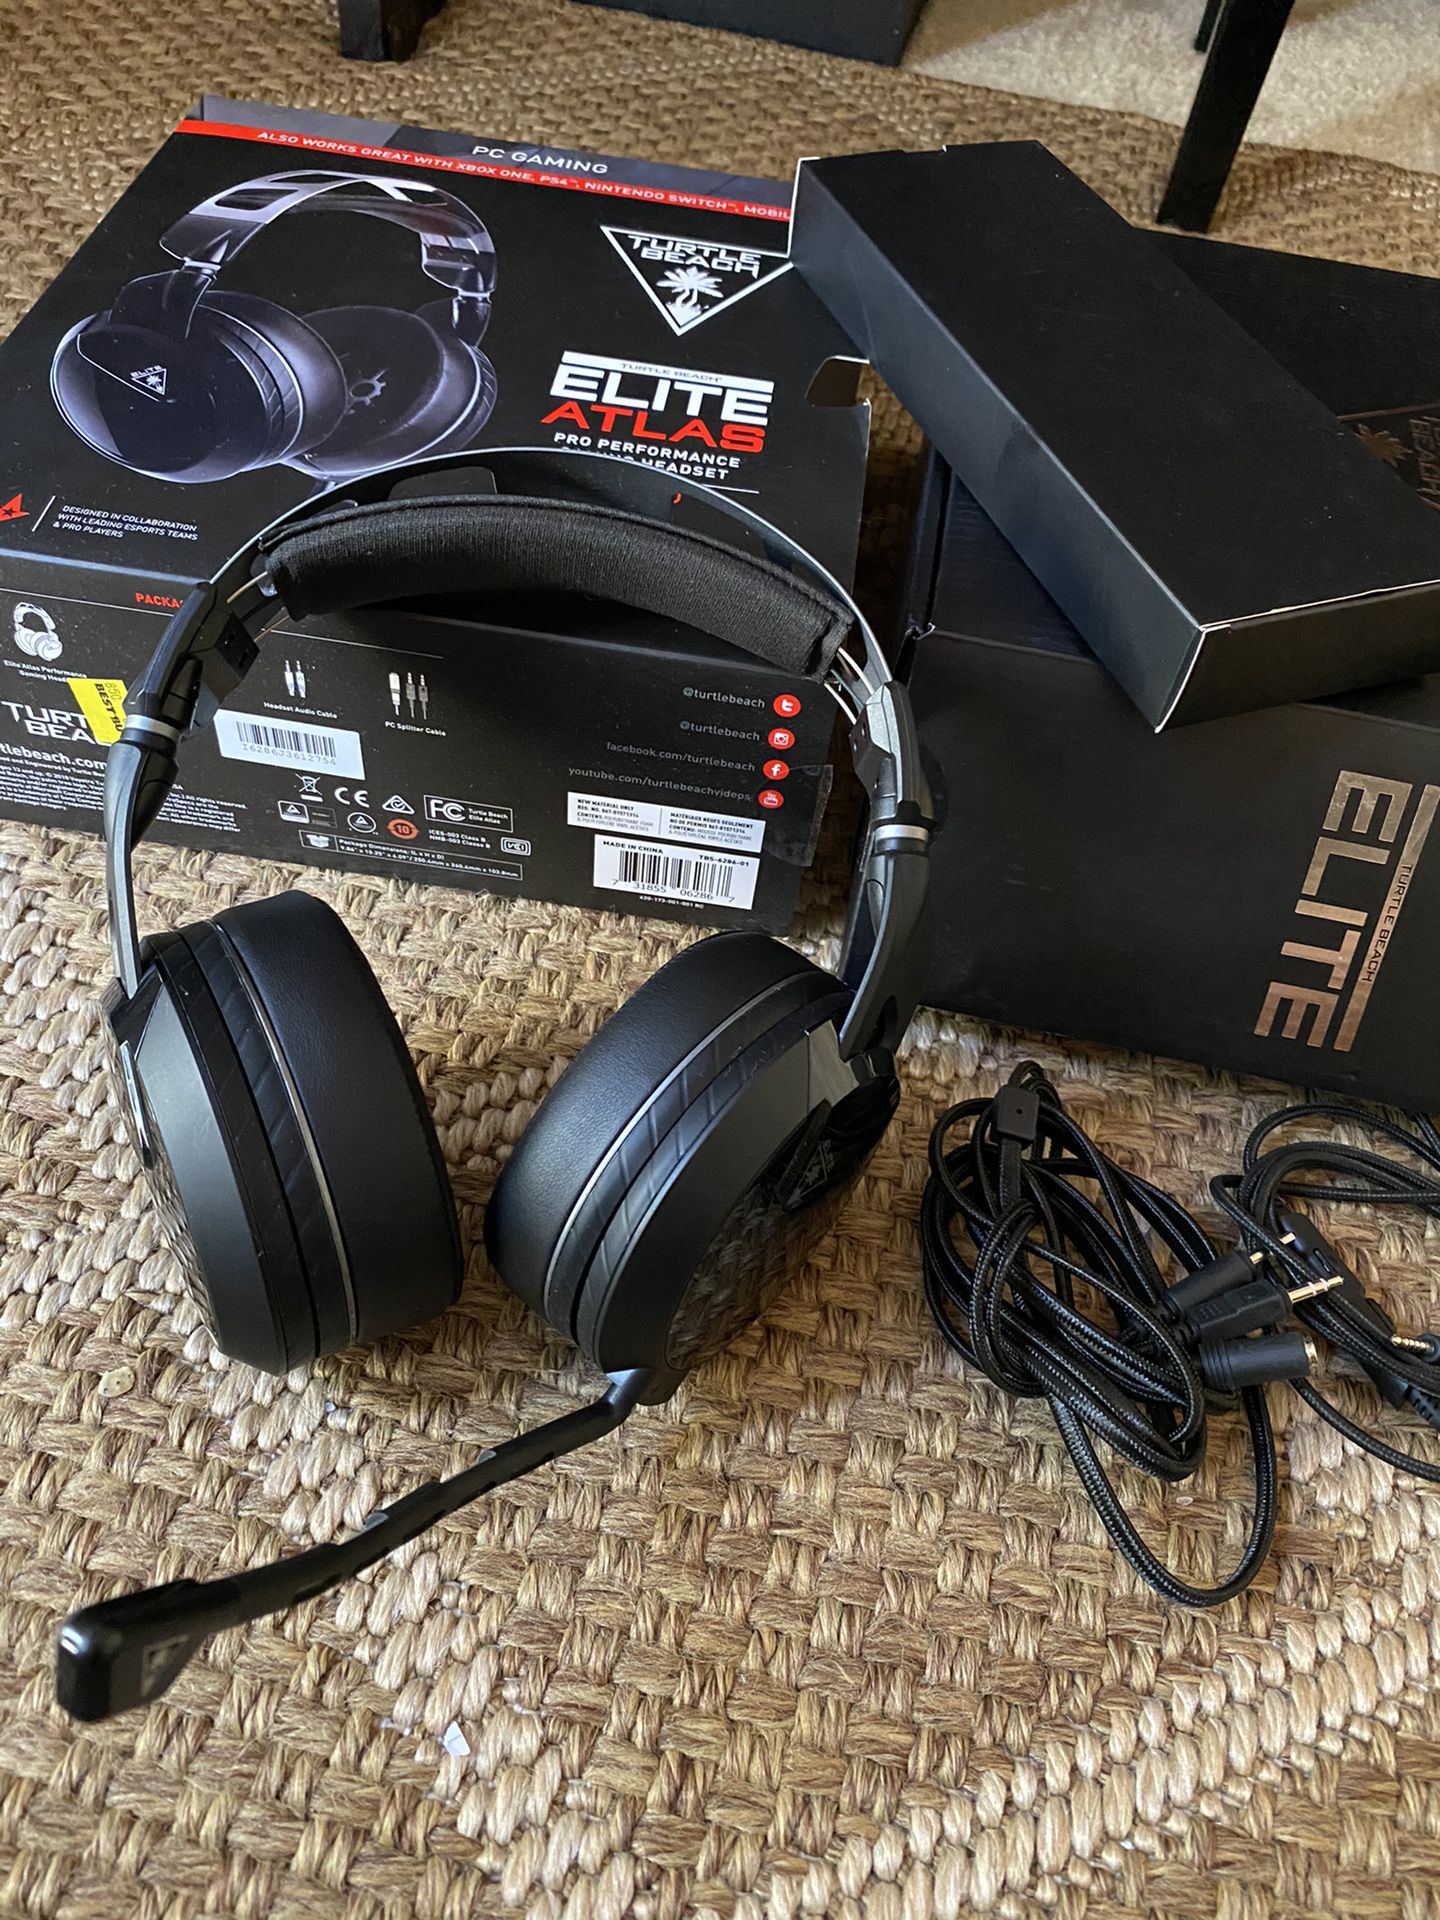 Turtle Beach Elite Atlas Pro Performance Wired Gaming Headphones... In good clean condition... Shows minor wear and minor scuffs...